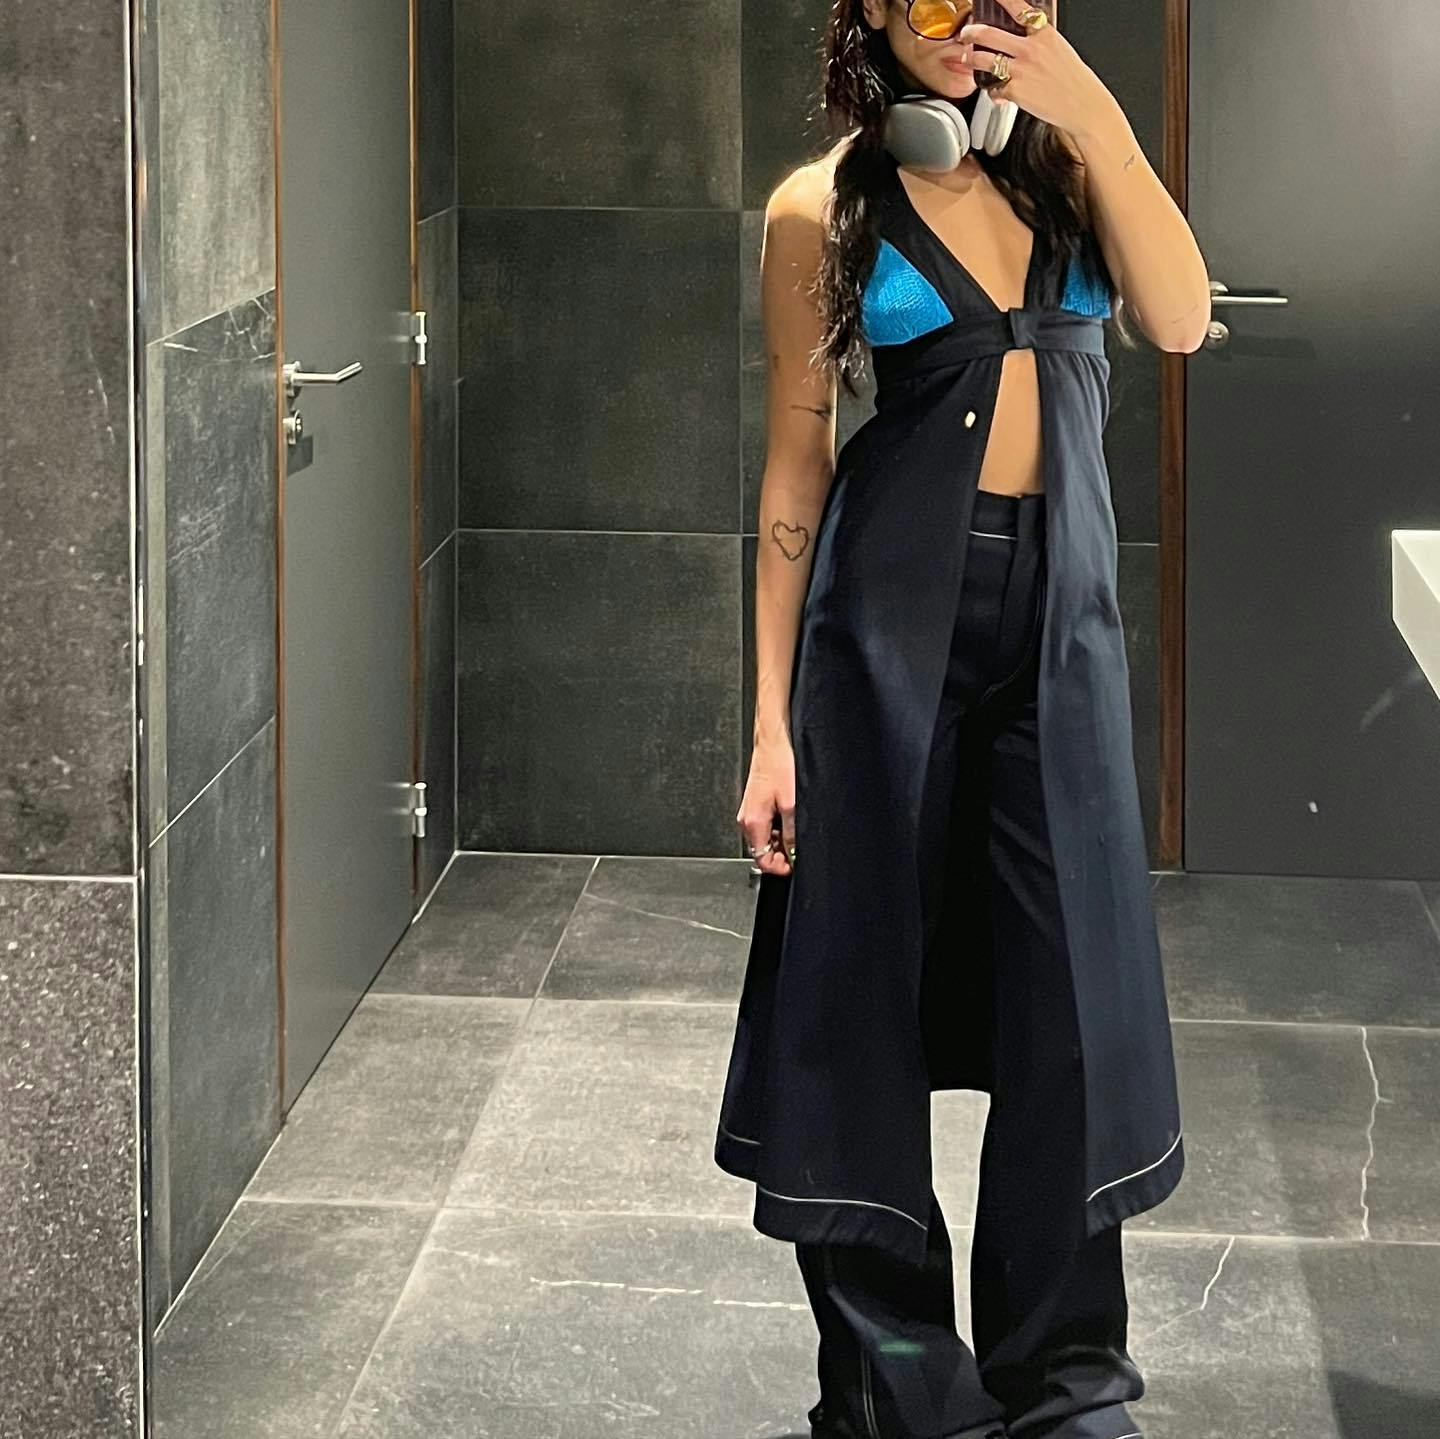 Bella Hadid Adds Y2K Spin to Fall Style in Denim Skirt & Leather